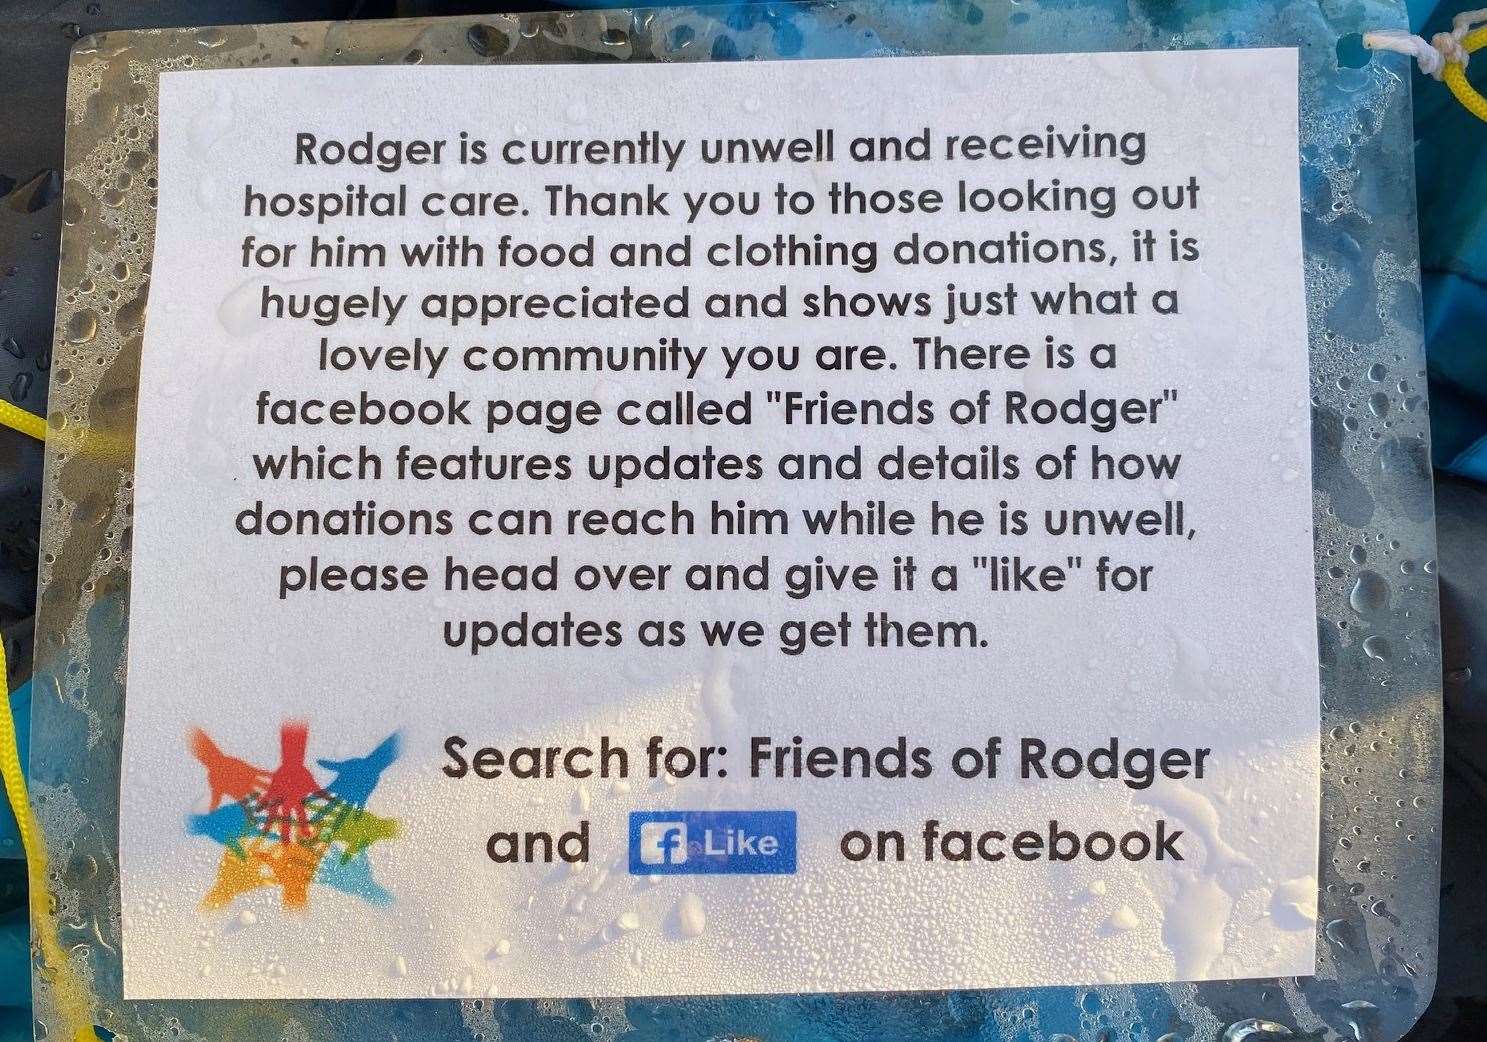 The note left on Rodger's tent in St Andrew's Road, Barming, in Maidstone, during his stay in hospital